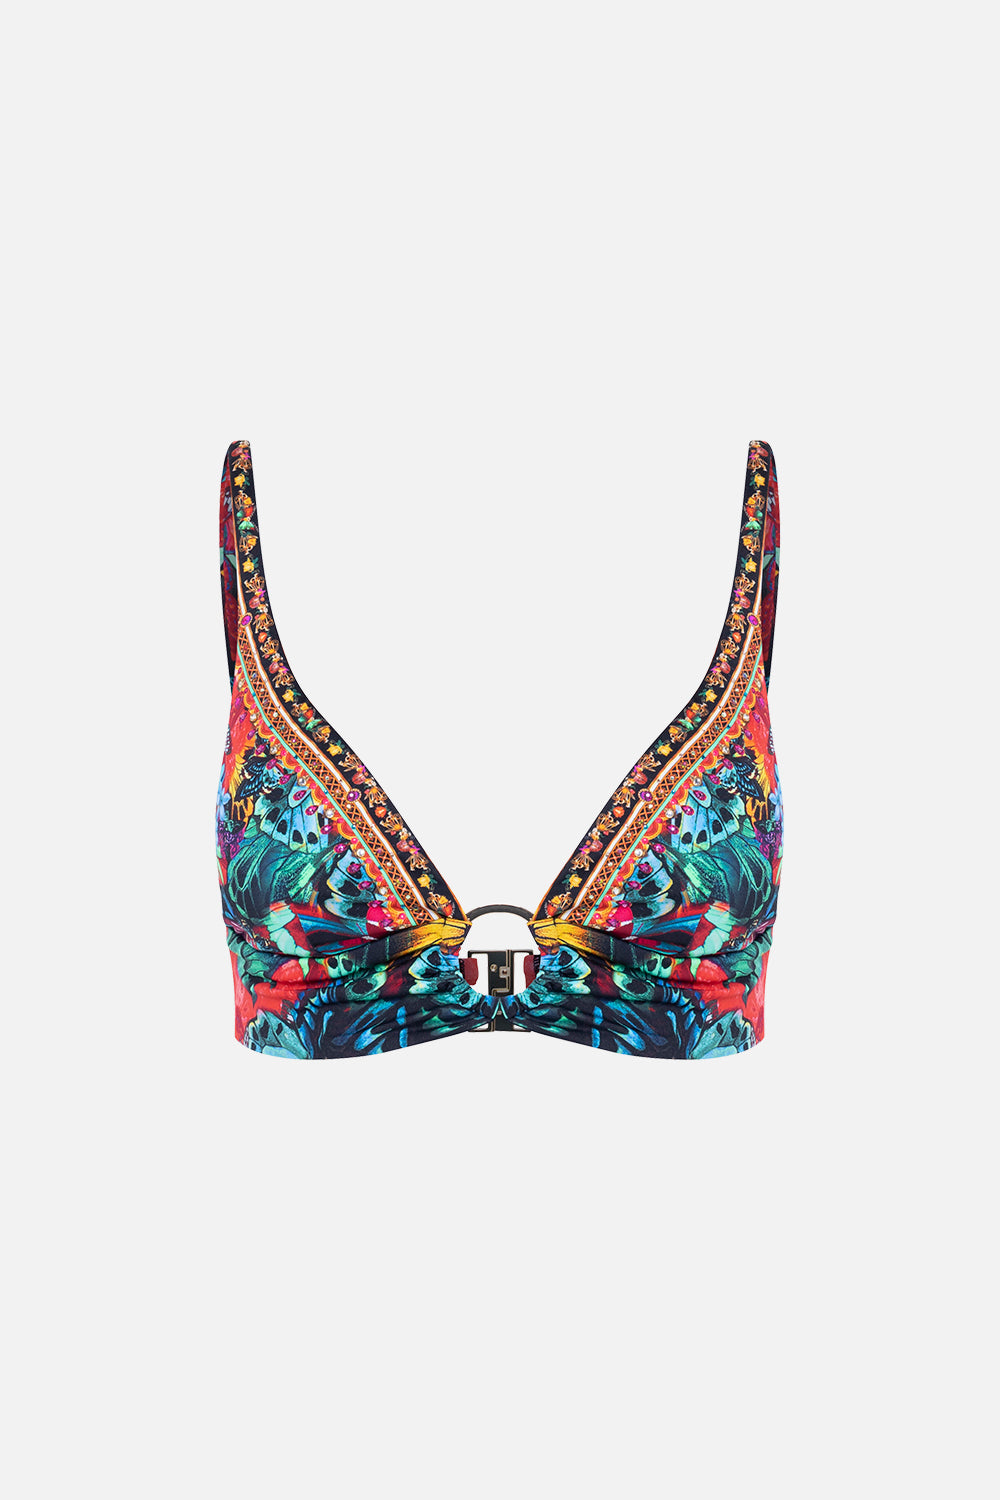 RING FRONT HIGH TRI BRA IN A FLUTTER